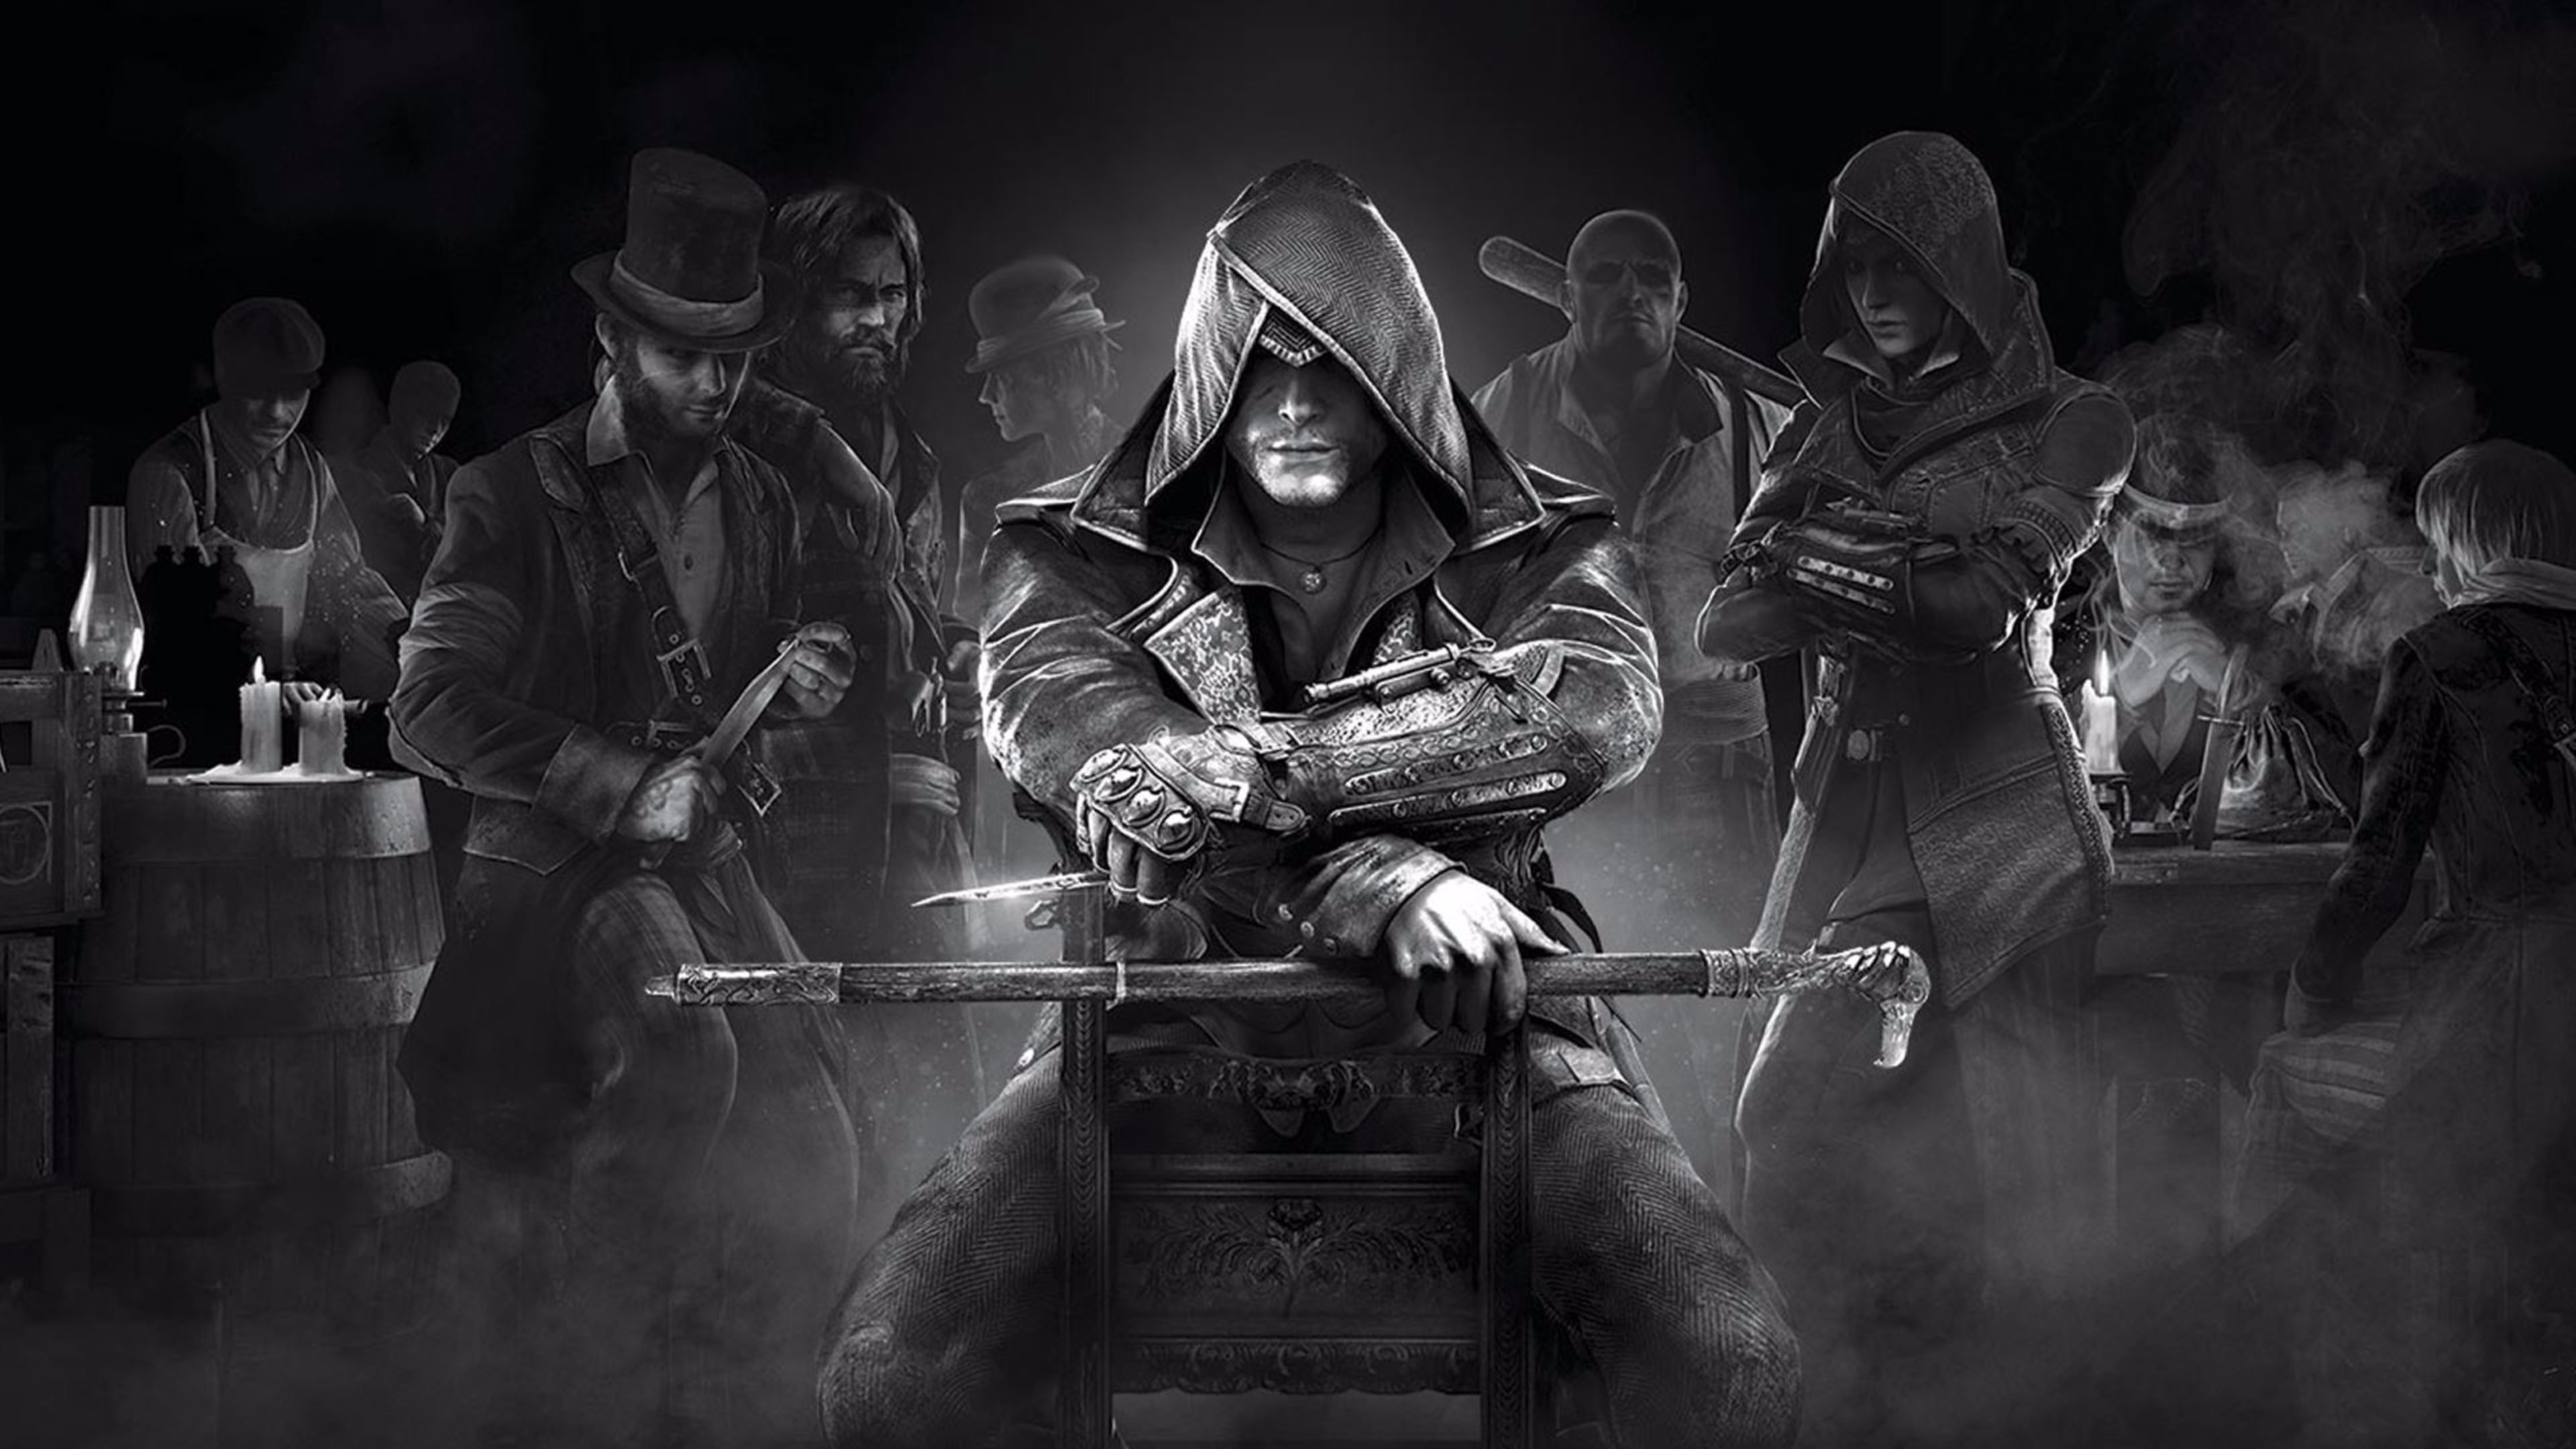 3840x2160 Black and White Assassin's Creed Syndicate 4K Wallpaper